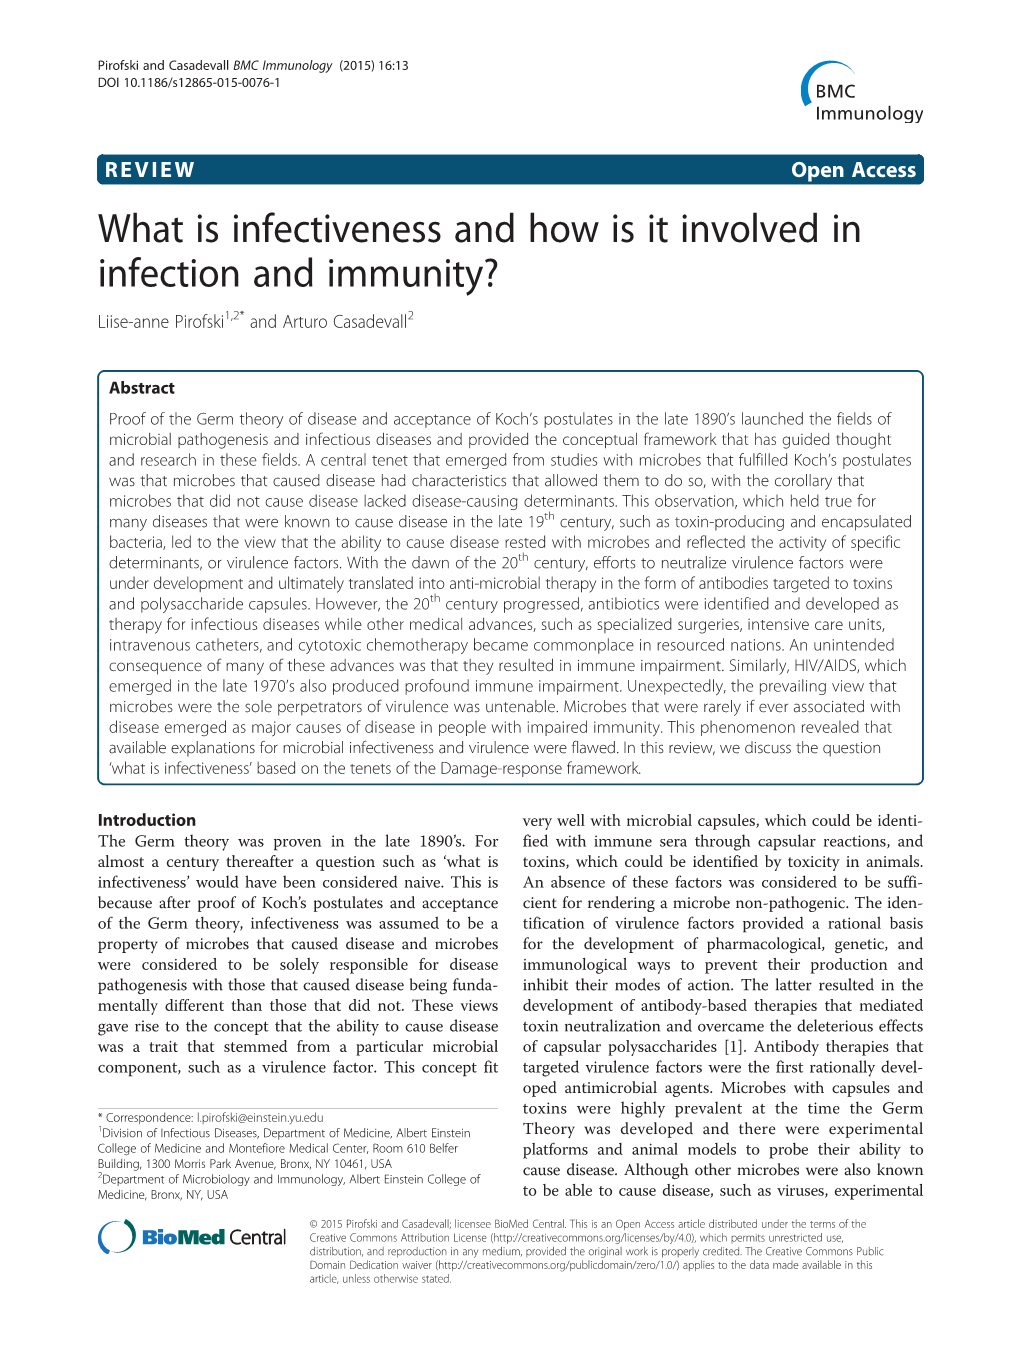 What Is Infectiveness and How Is It Involved in Infection and Immunity? Liise-Anne Pirofski1,2* and Arturo Casadevall2